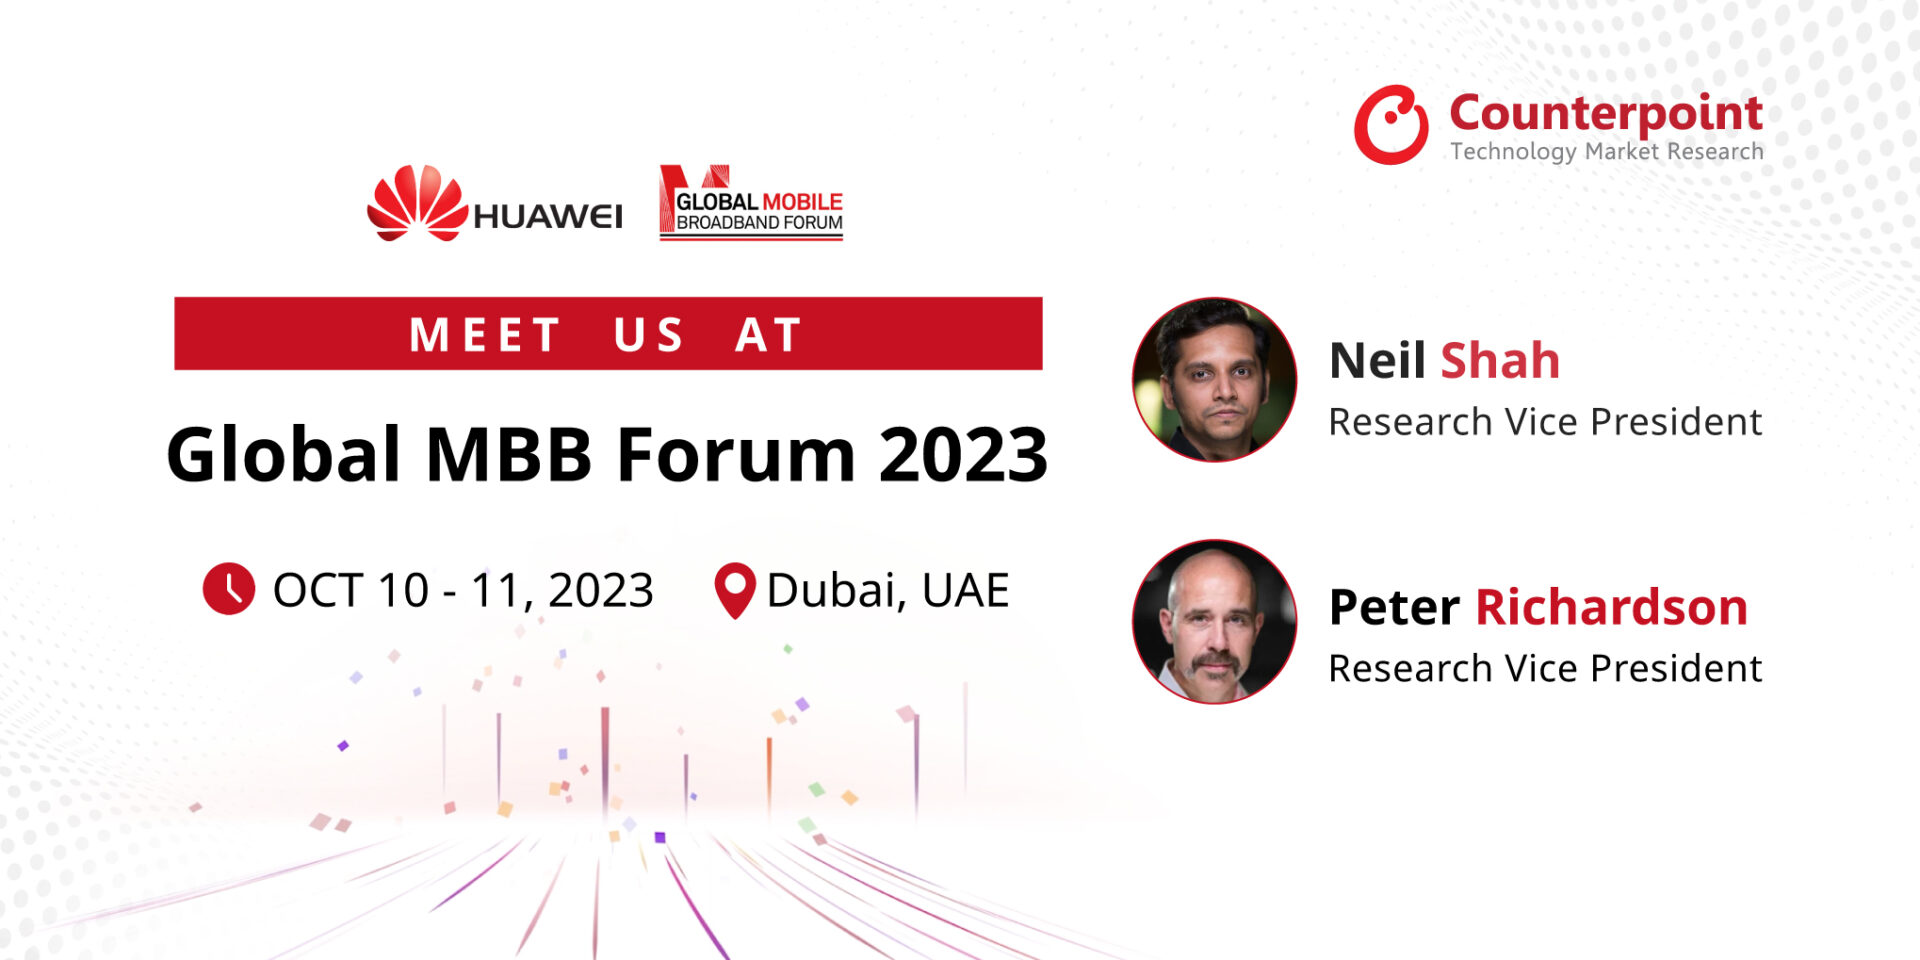 Announcement Poster for Counterpoint Research attending Huawei's Global MBB Forum 2023 in Dubai on 10th and 11th October 2023